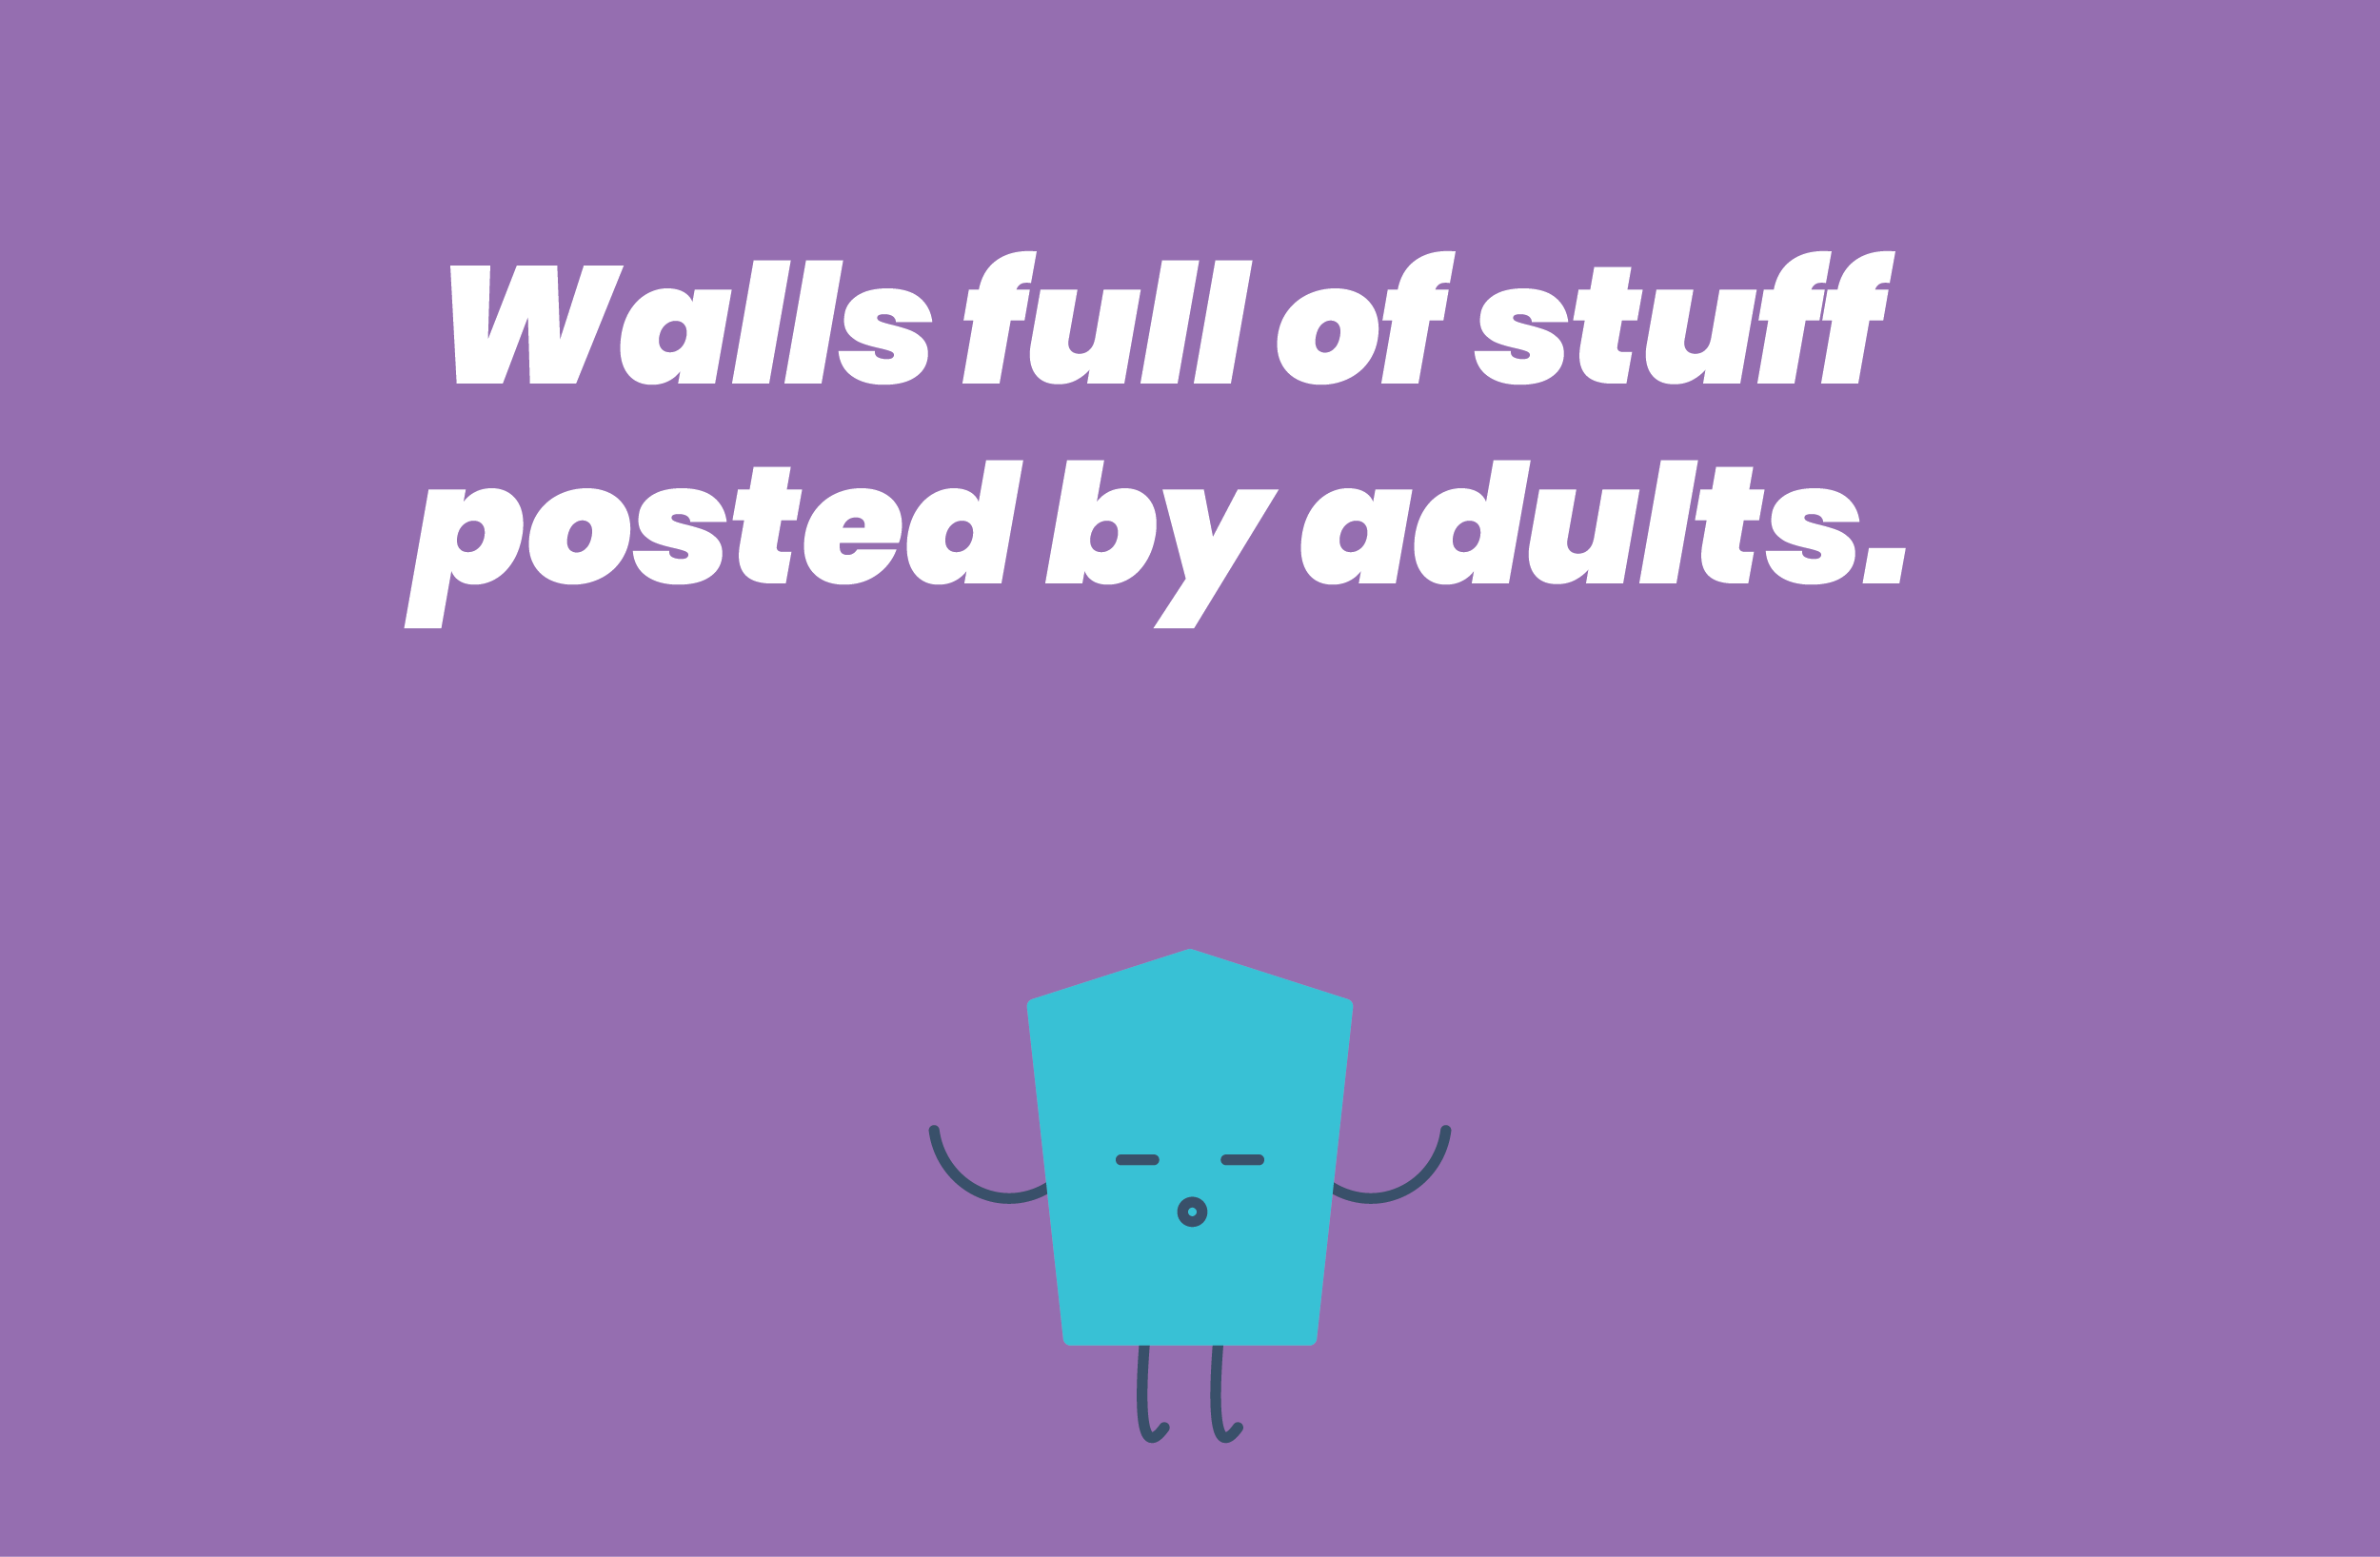 Walls full of stuff posted by adults.